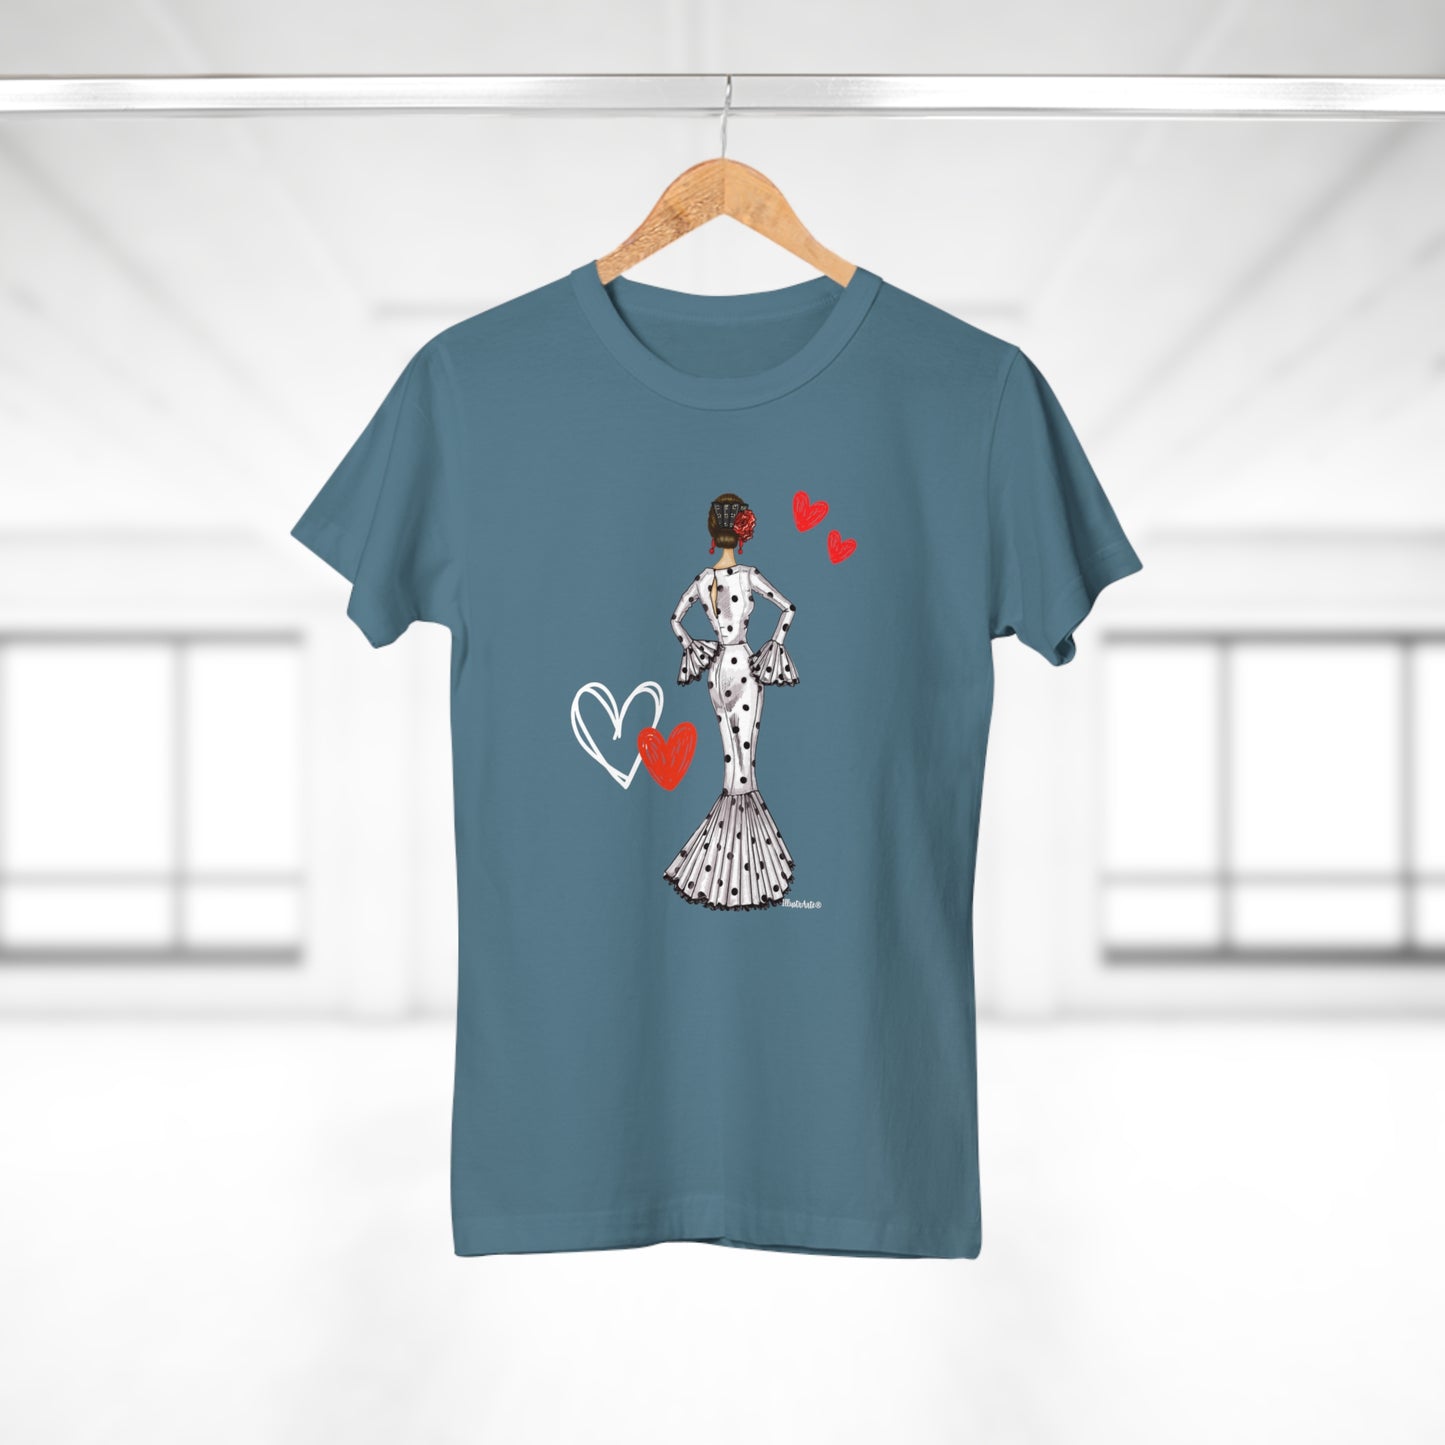 a t - shirt with a woman in a dress and a heart on it